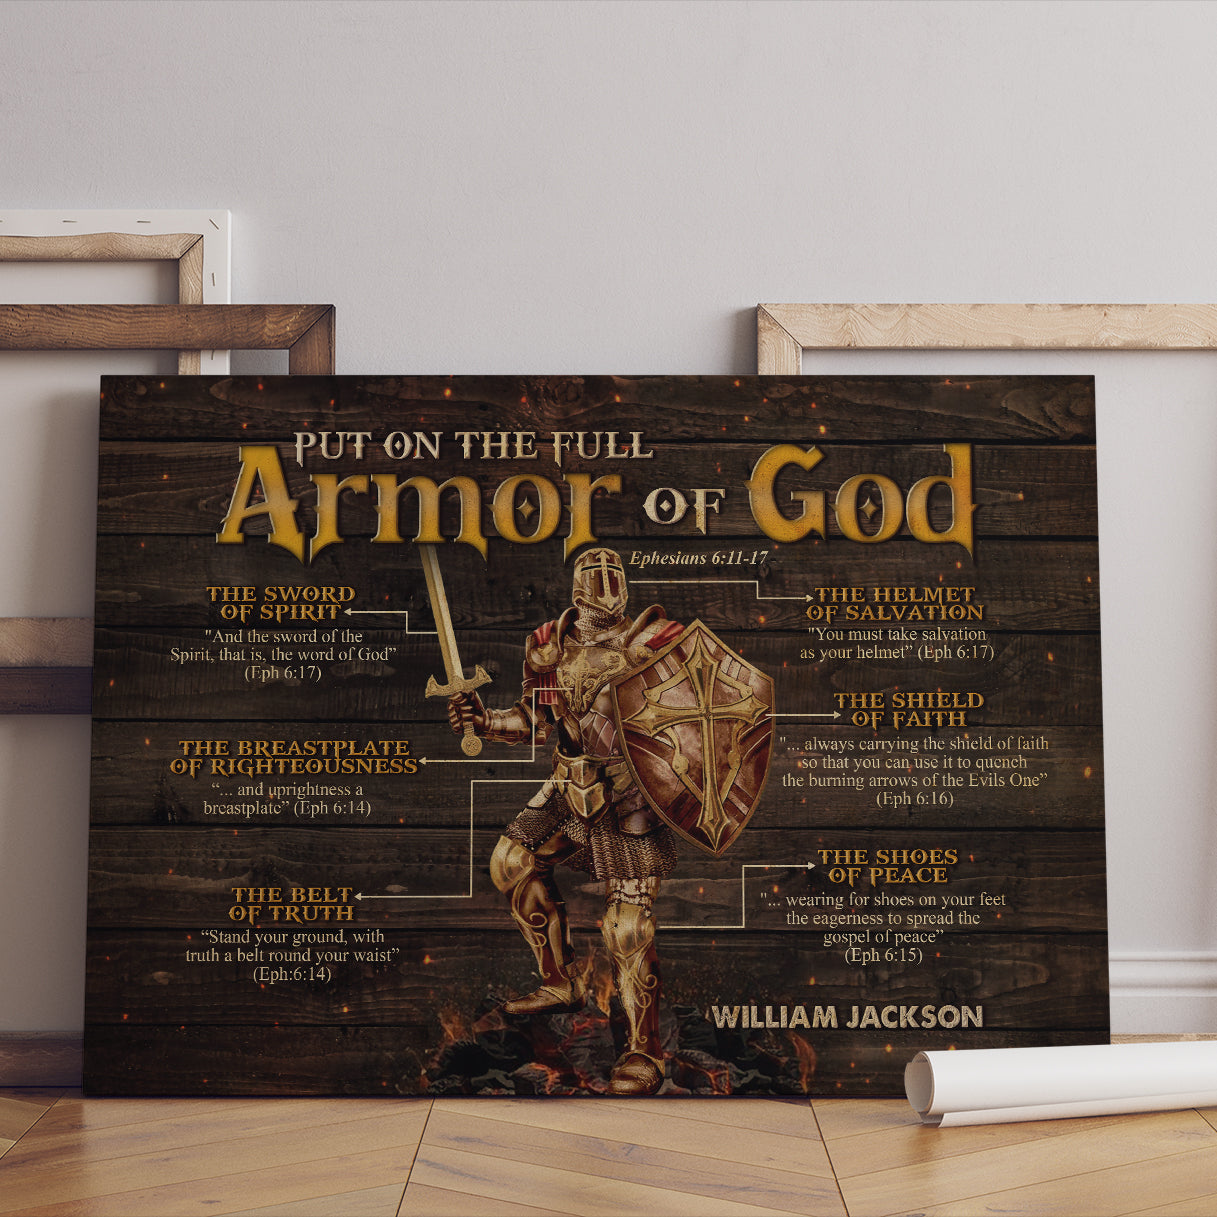 Warrior Of God Canvas - Put On The Full Armor Of God - Armor Of God Bible Verse Canvas Wall Art